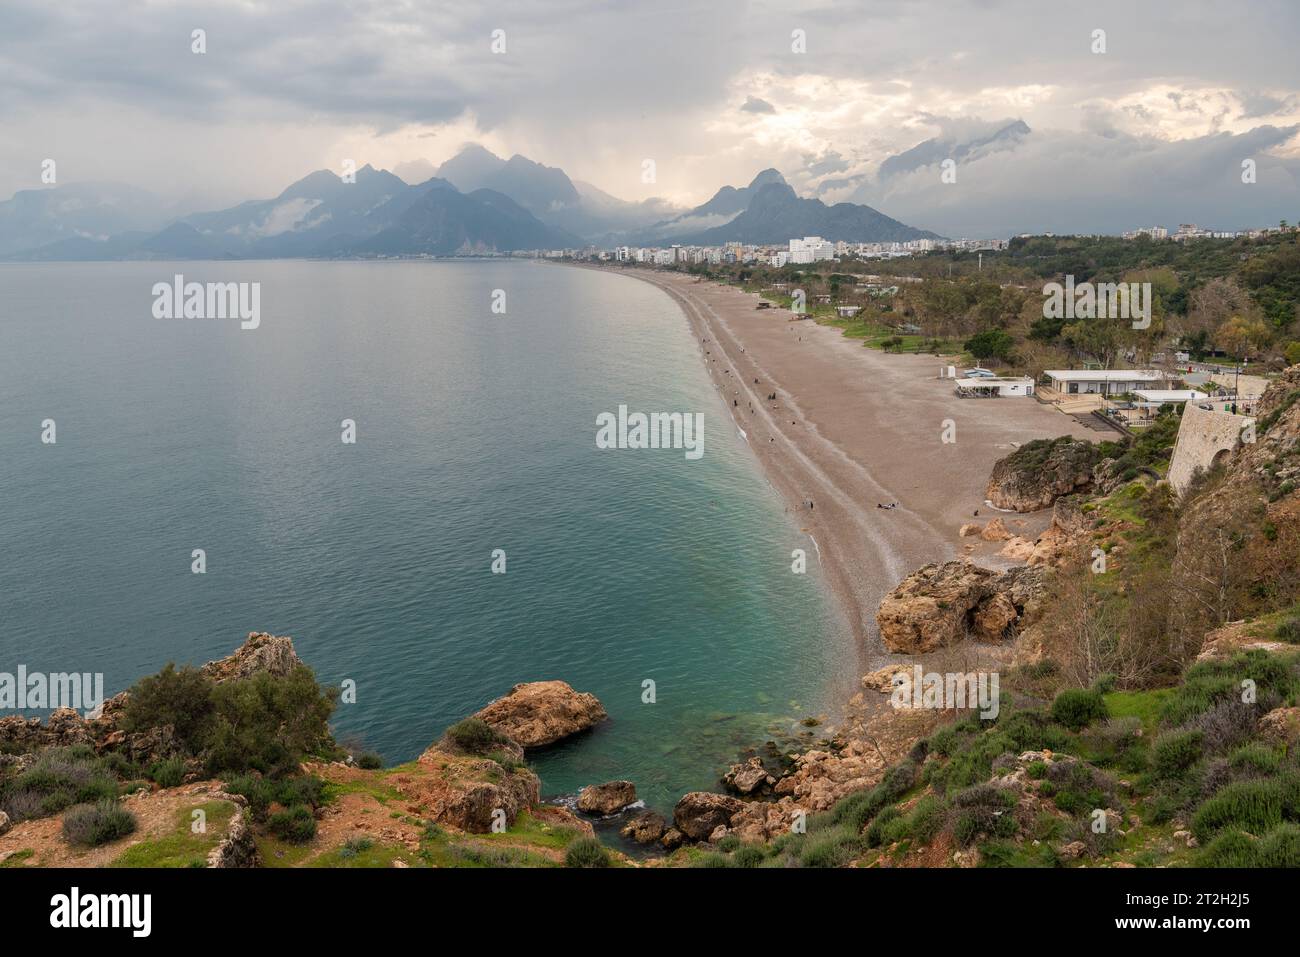 Konyaalti Beach in Antalya, Turkey. The beach is located on the western side of the city and stretches for 13 km primarily composed of fine pebbles, b Stock Photo